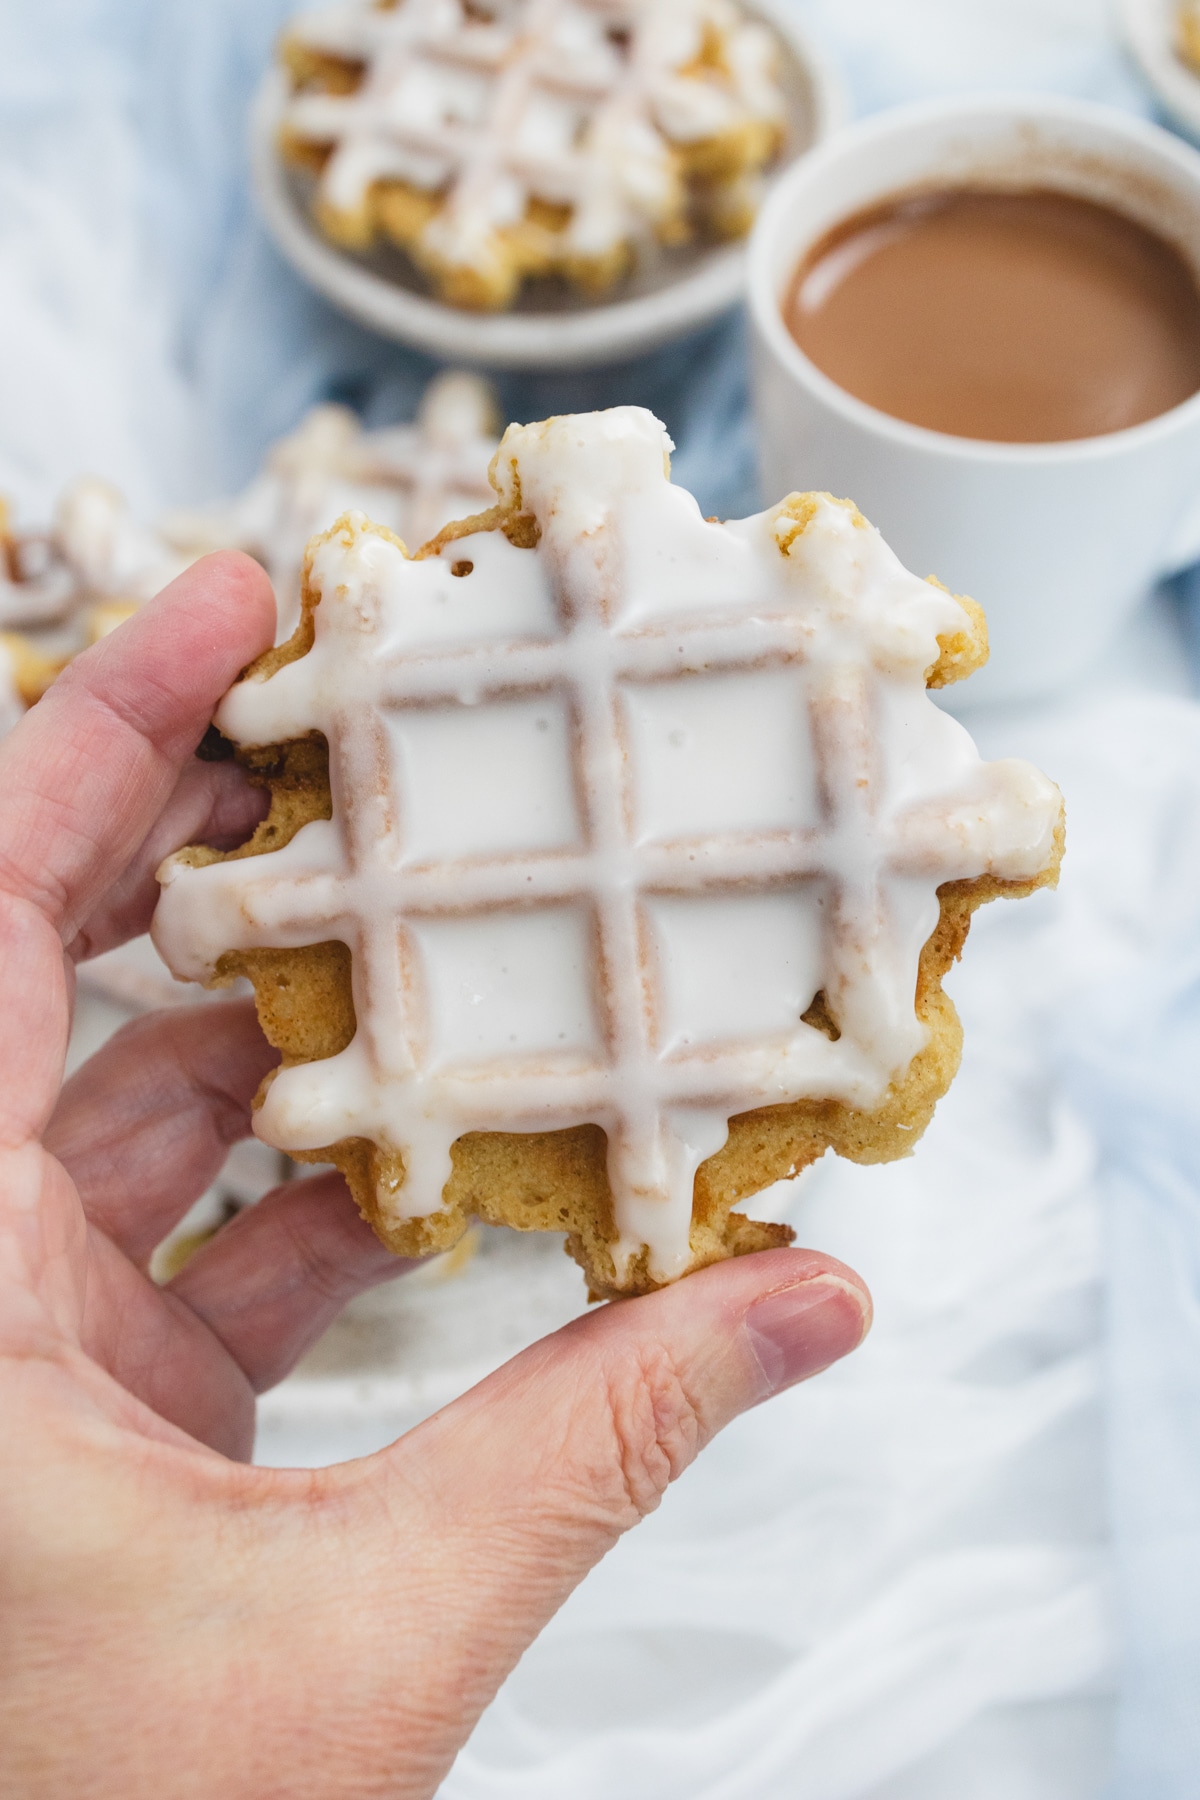 Top view close up of a waffle cookie coated in powdered sugar being held in mid-air.